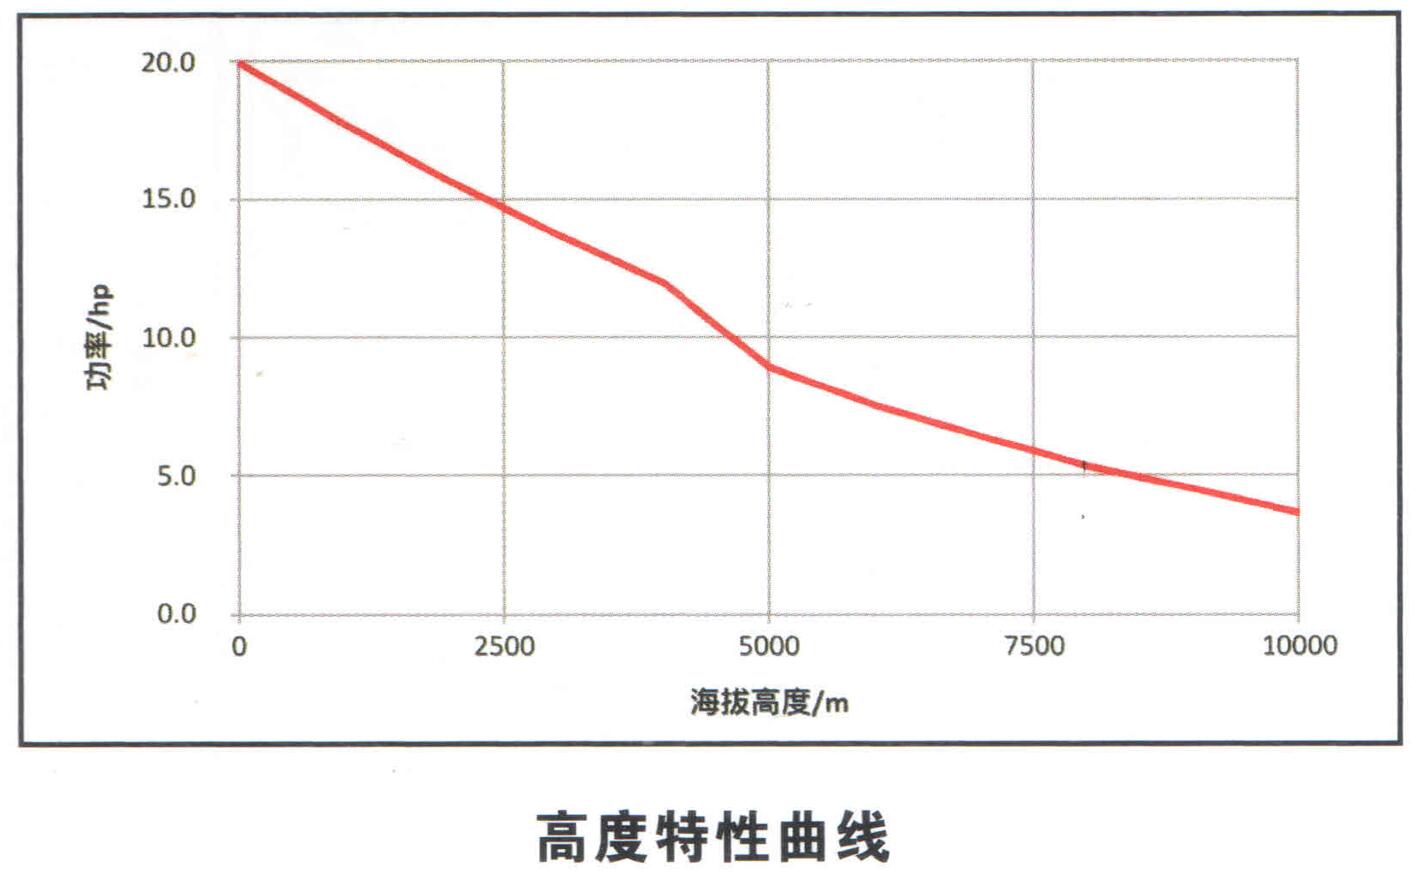 Height characteristic curve